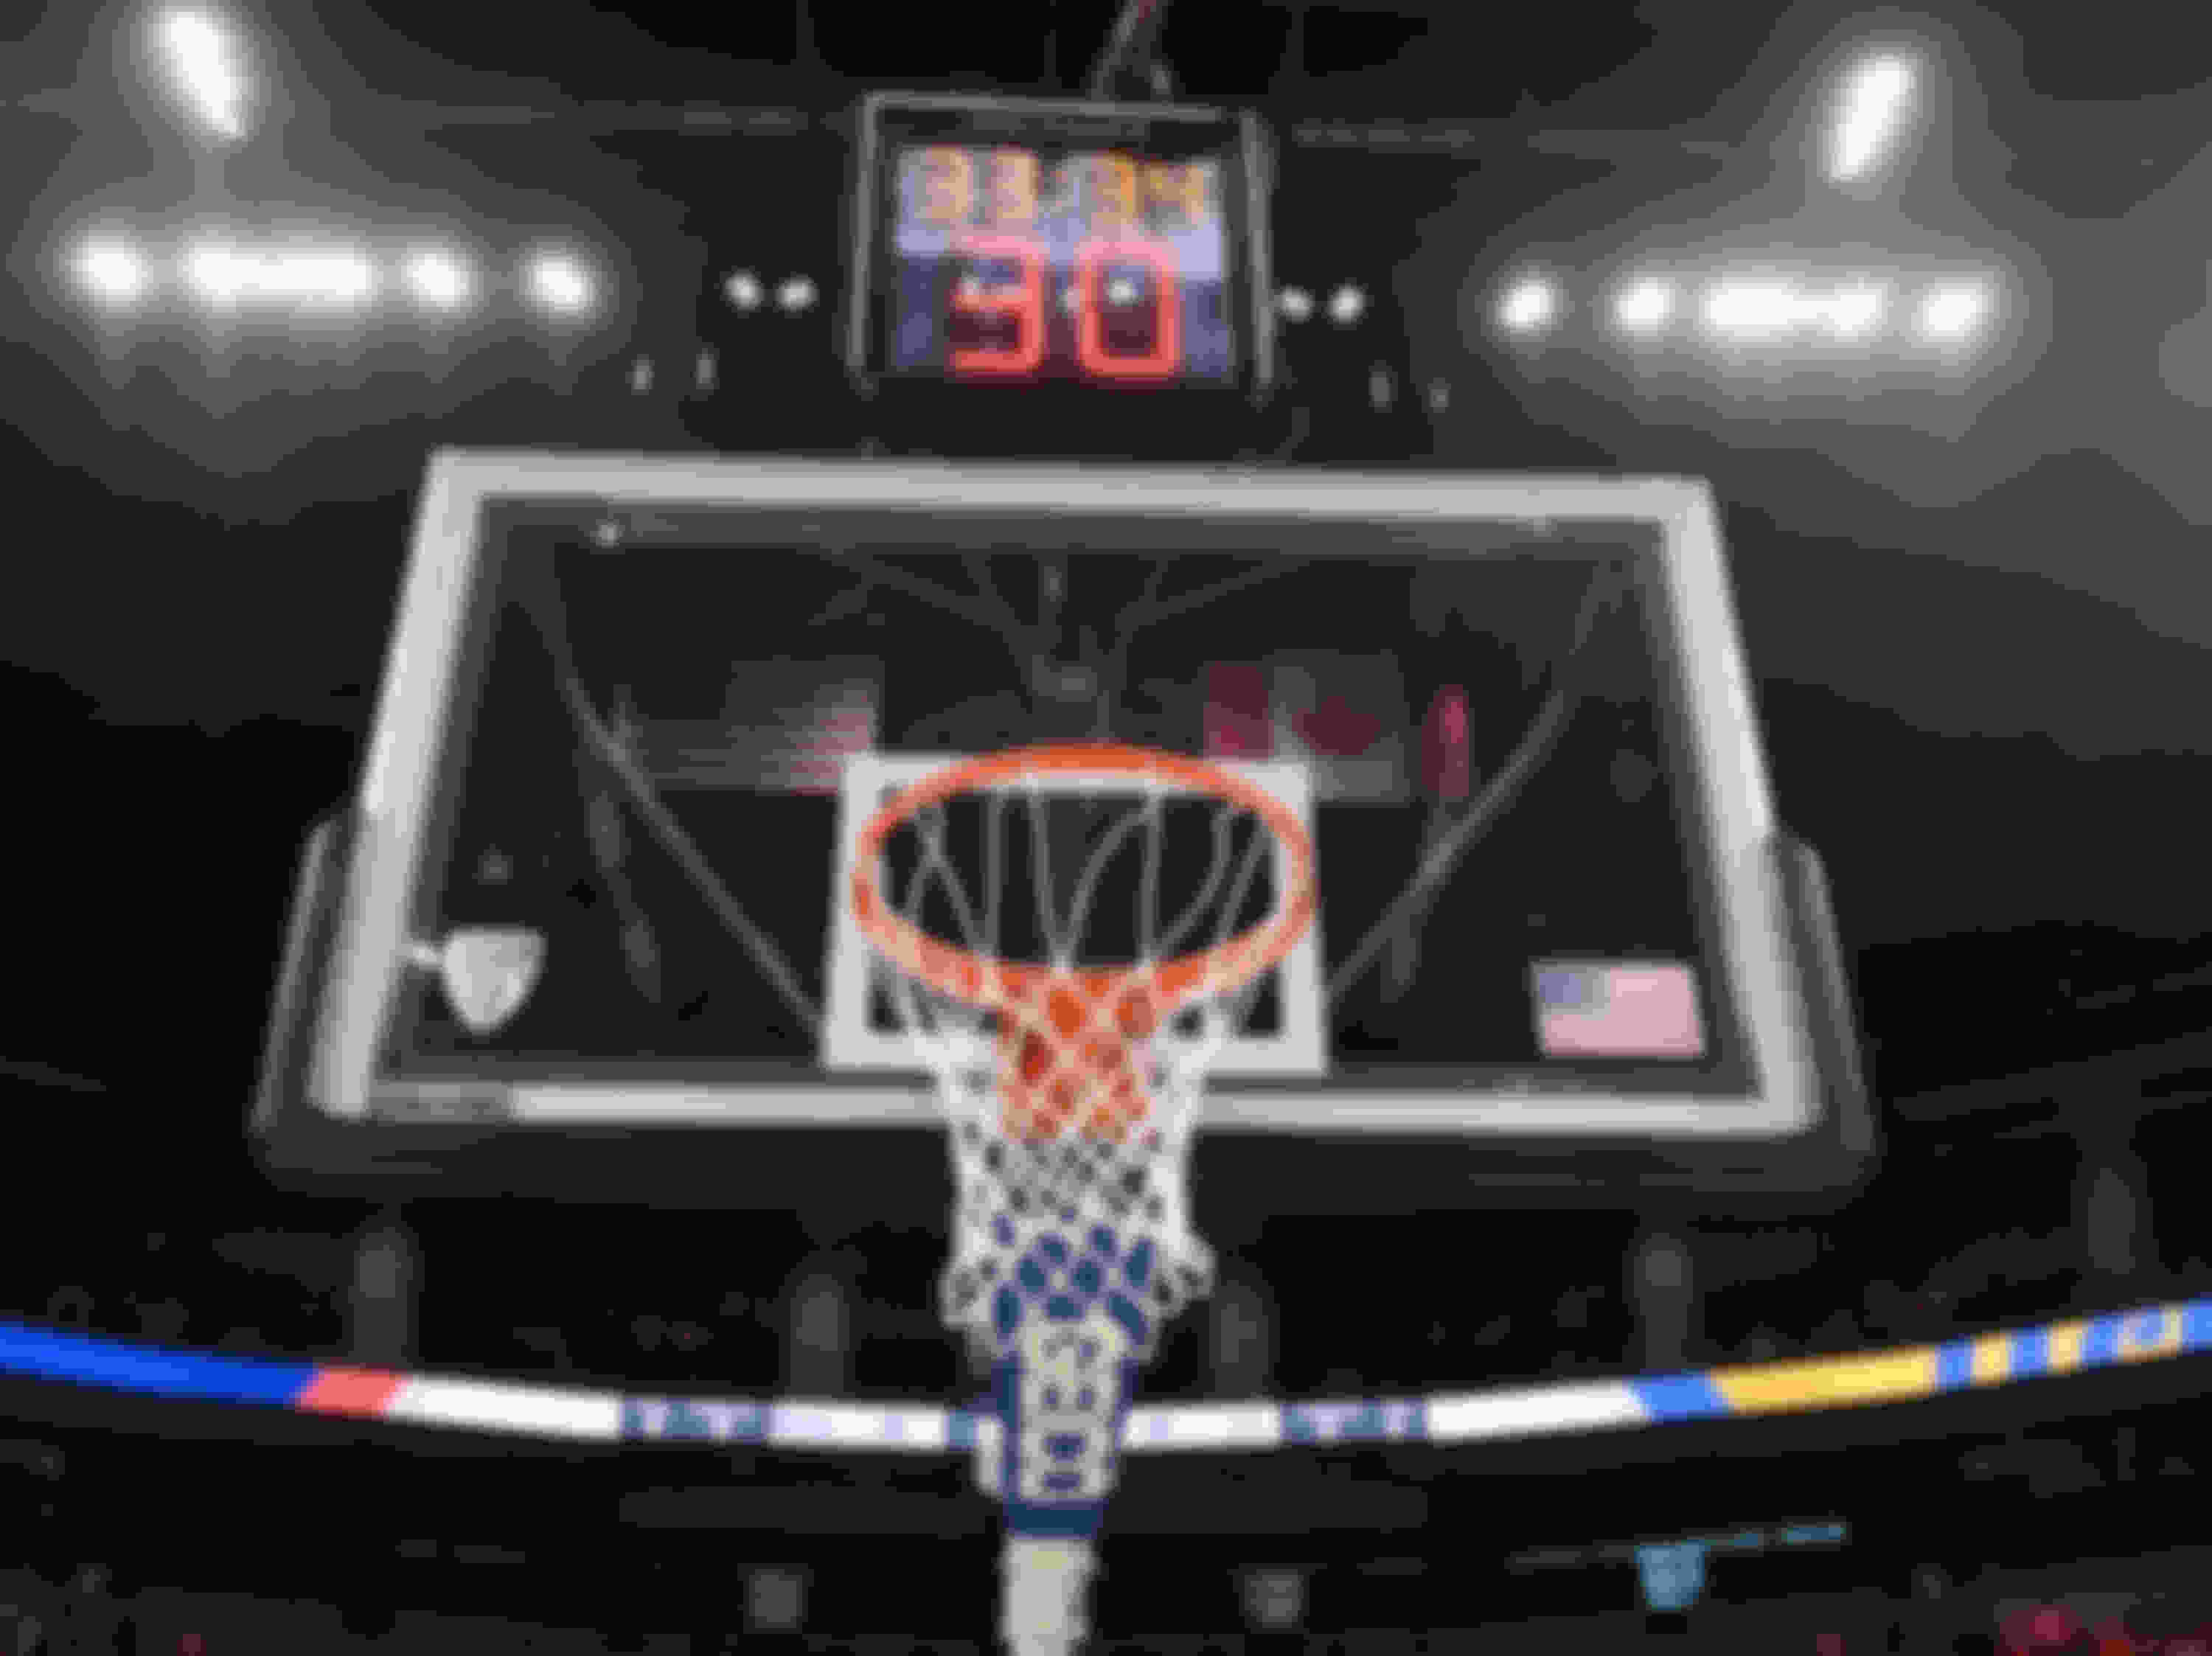 A Shot Clock stopwatch is typically displayed behind the basket during a basketball game.